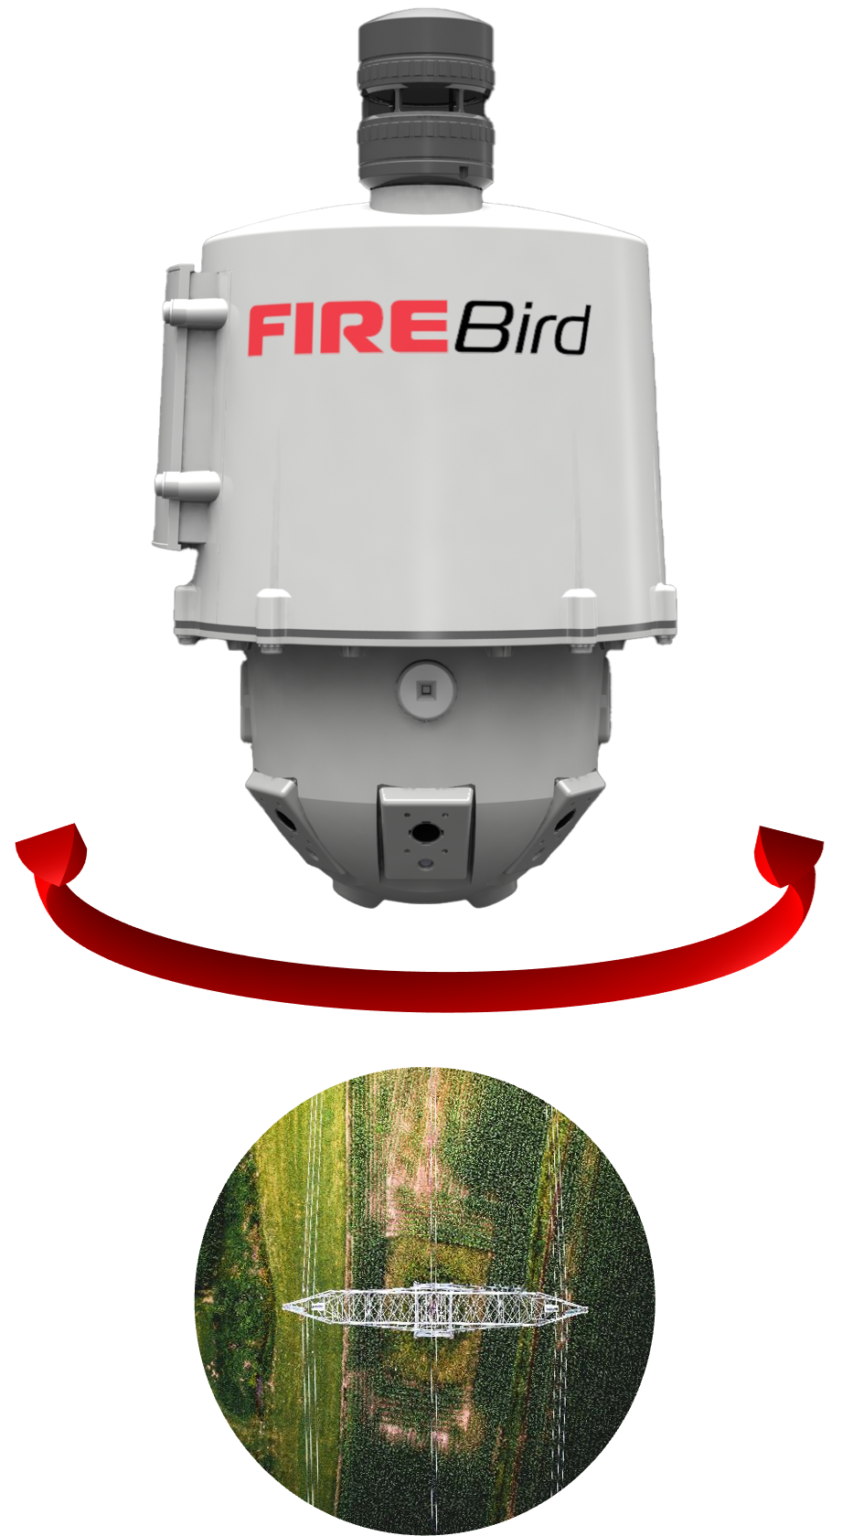 FIREBird offers continuous 36-degree detection